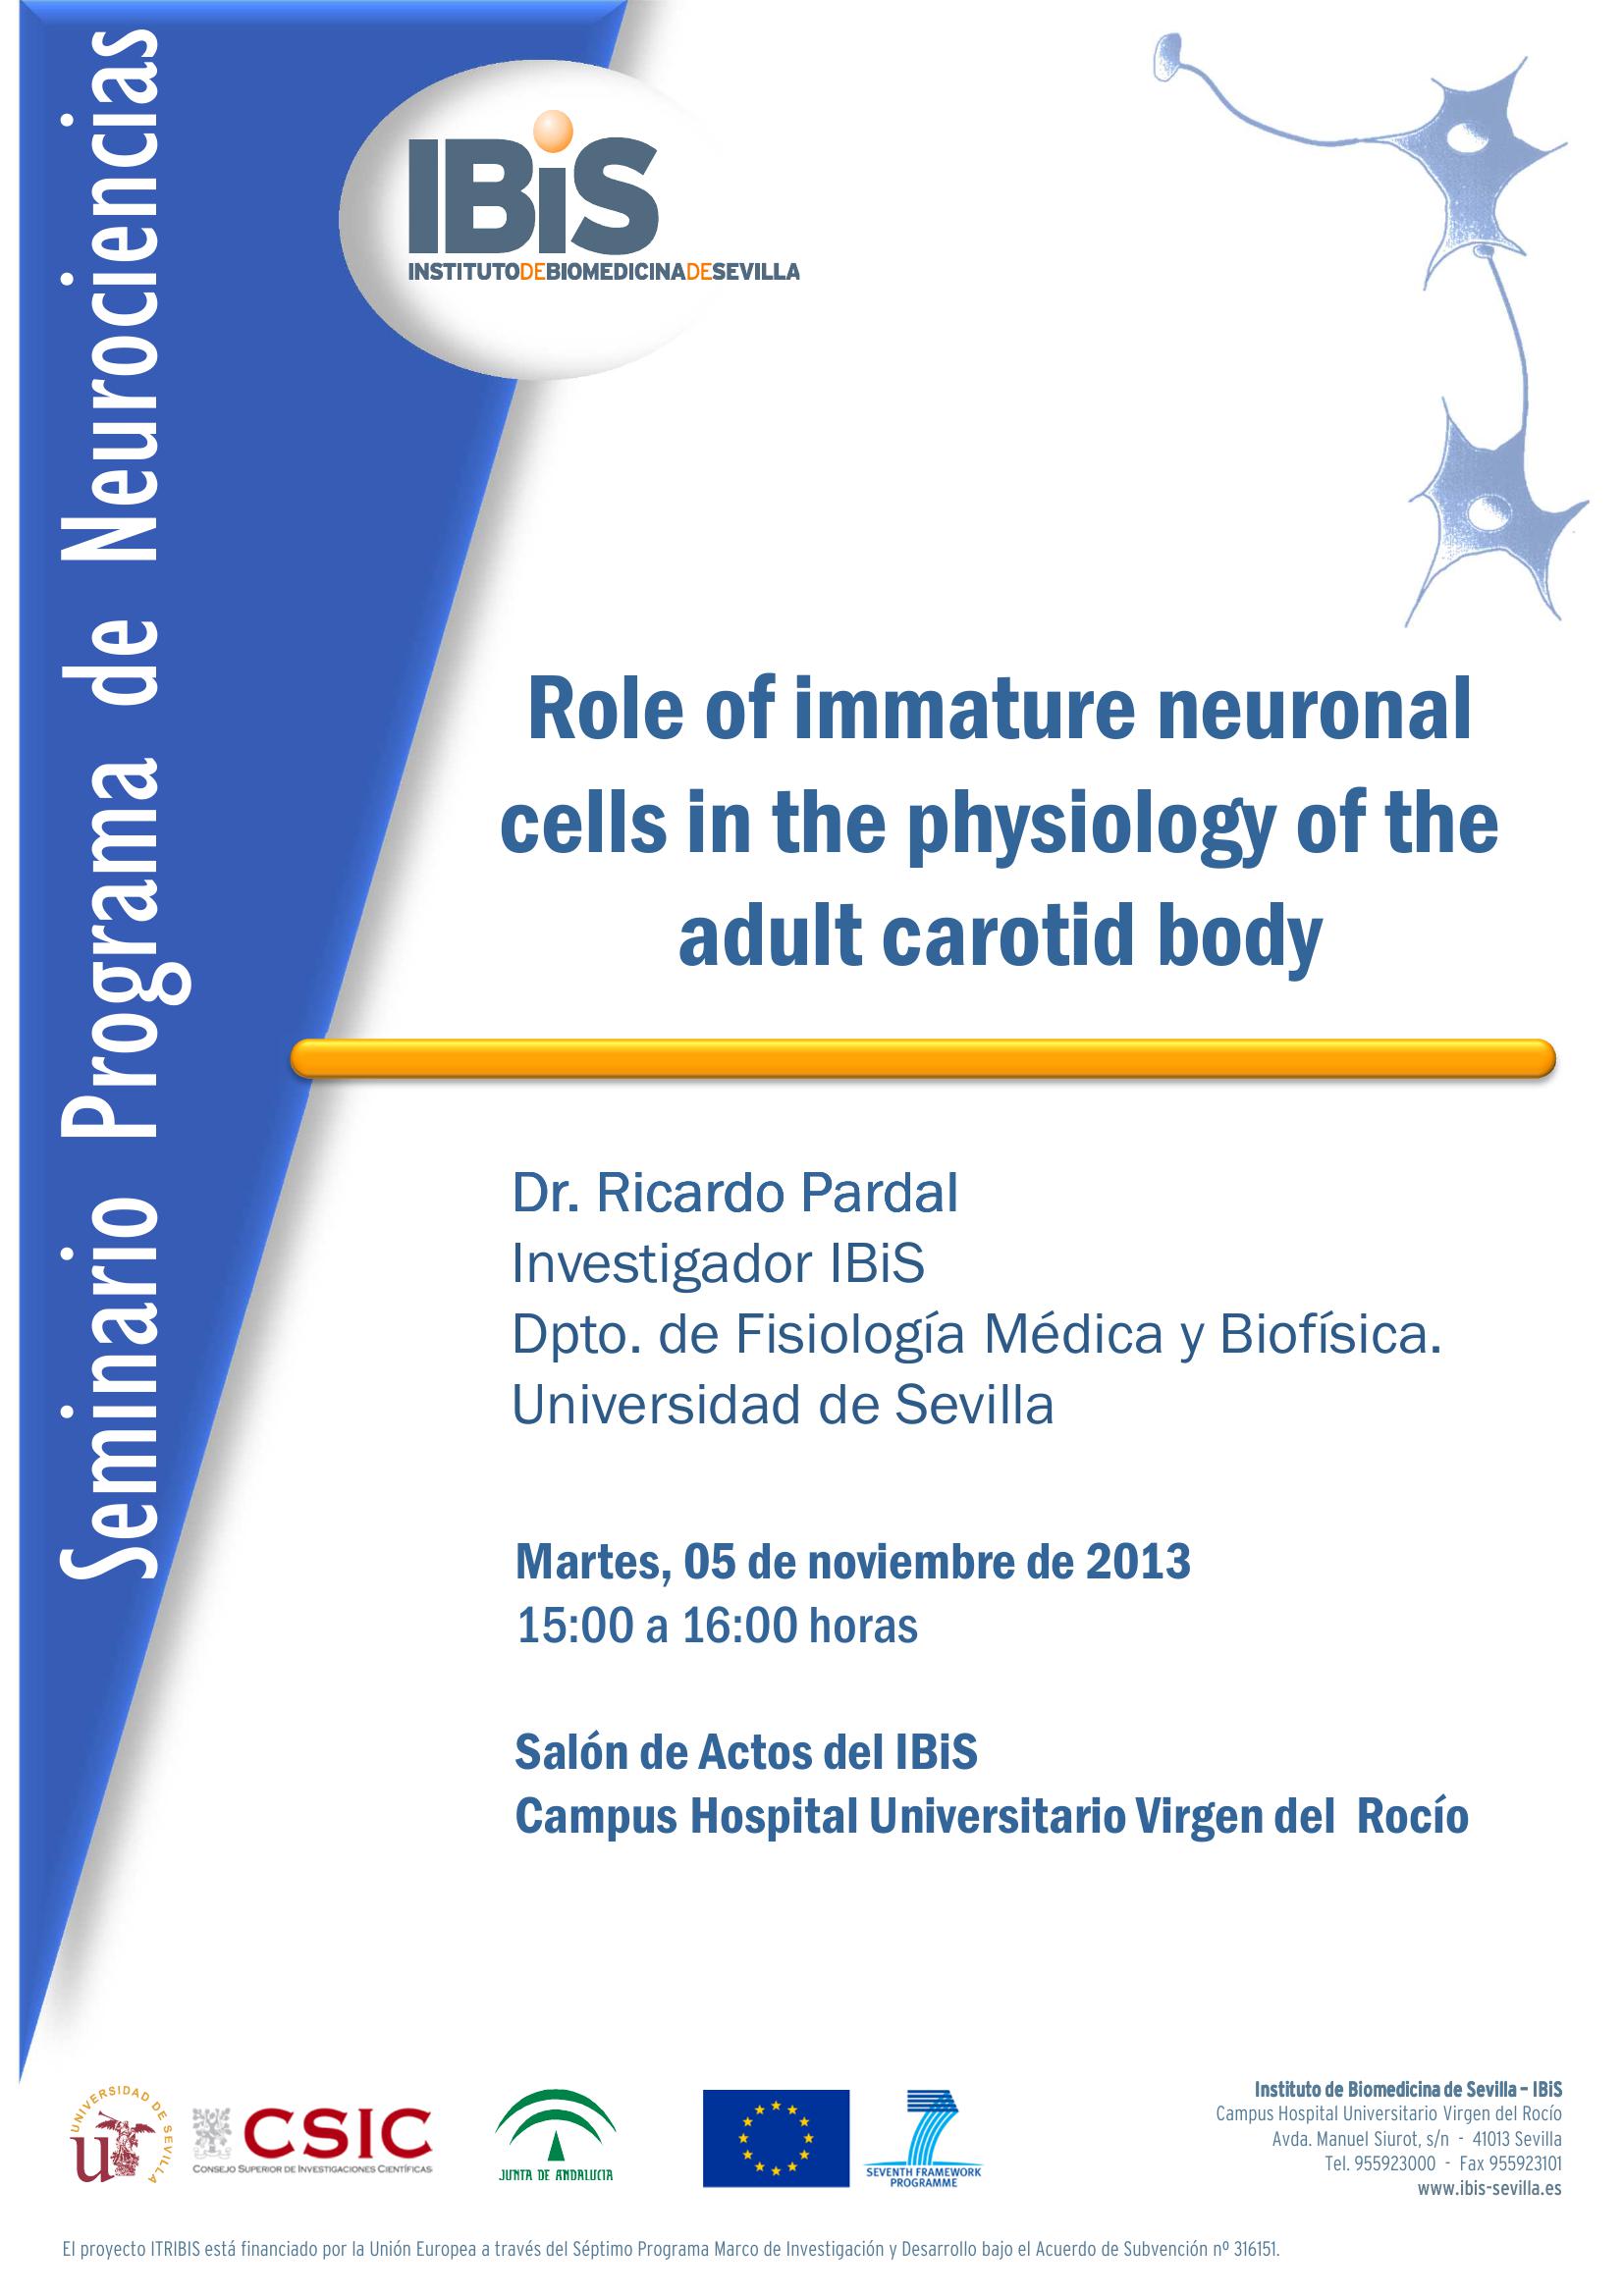 Poster: Role of immature neuronal cells in the physiology of the adult carotid body